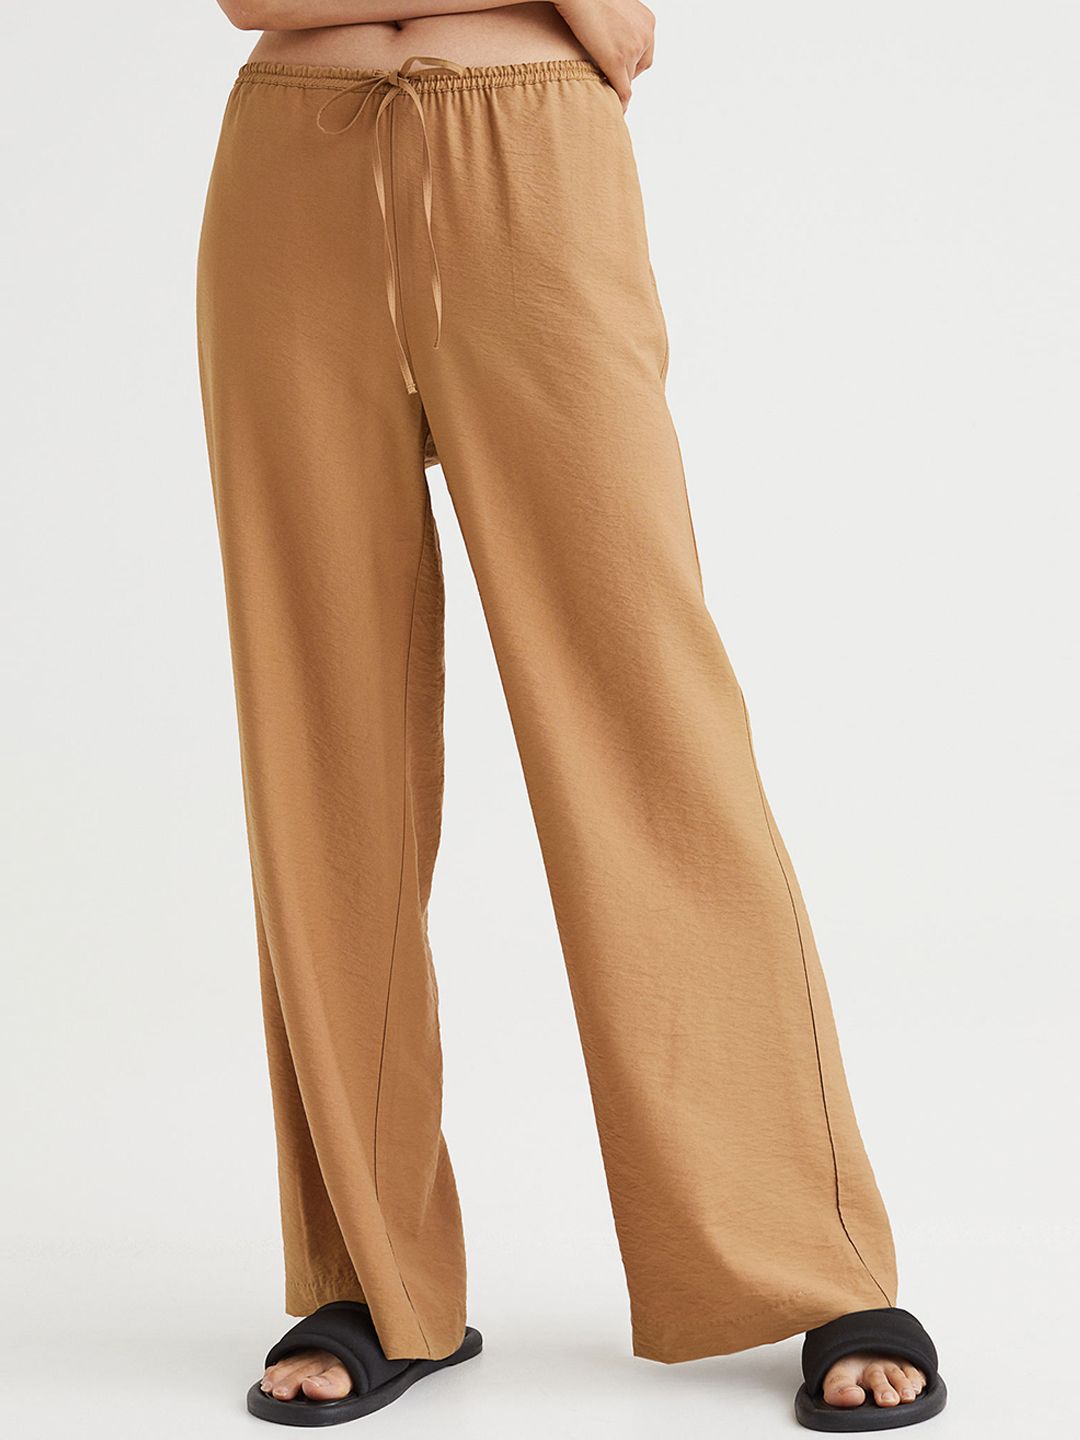 H&M Women Beige Straight Fit Trousers Price in India